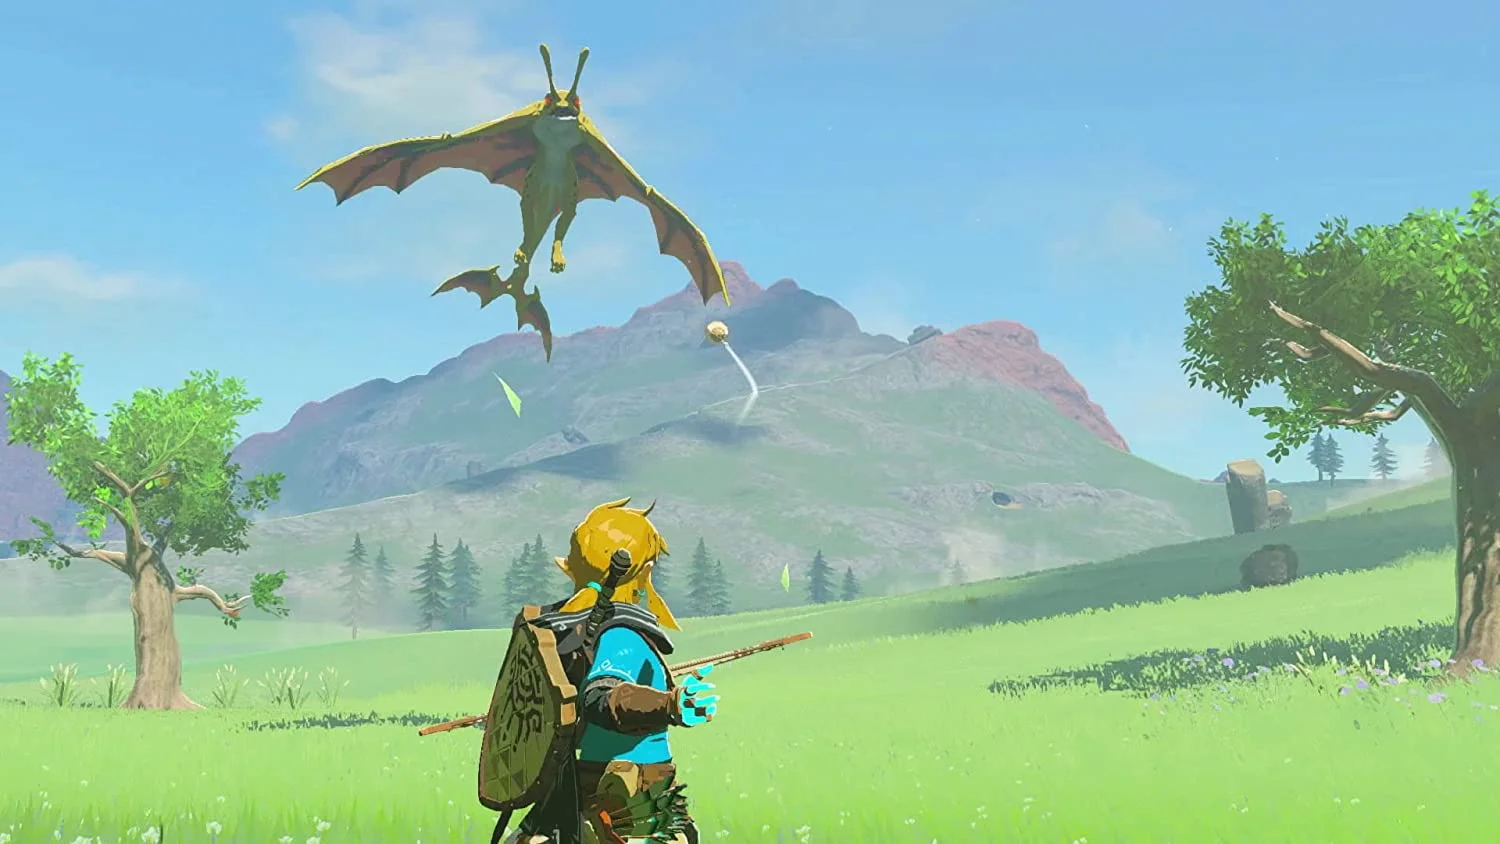 The director of the film adaptation of The Legend of Zelda spoke about his vision for the film